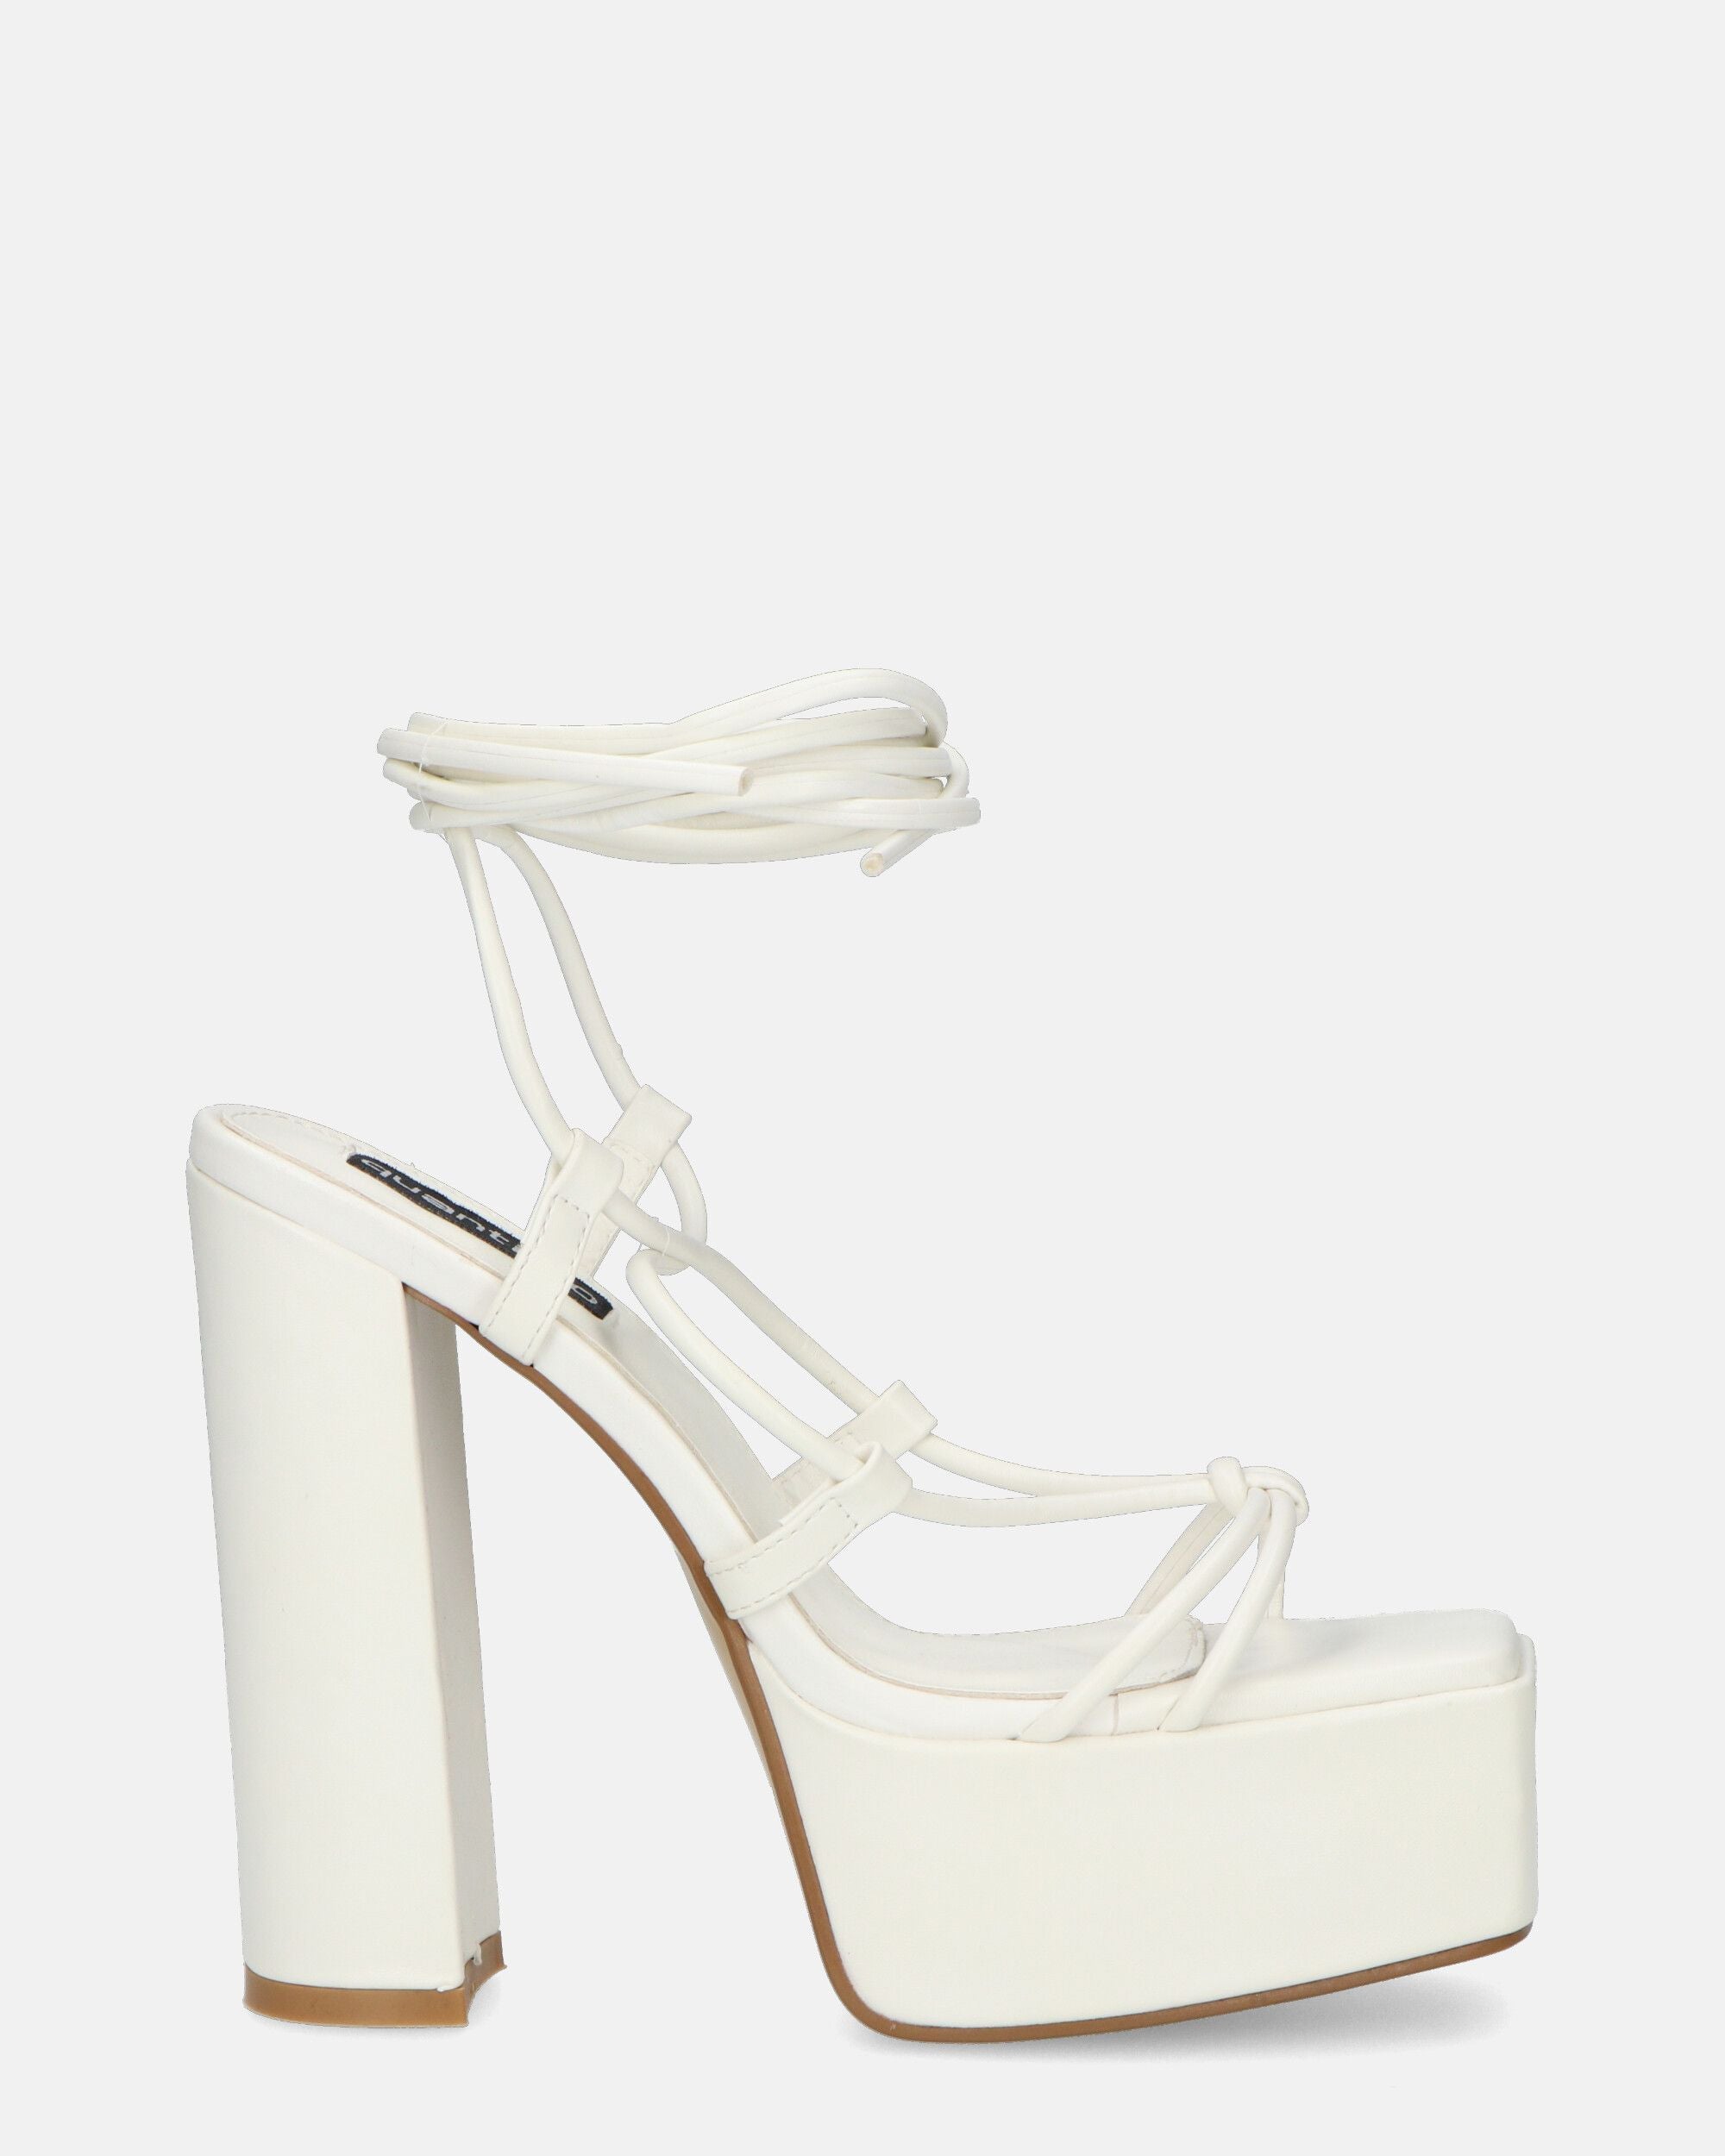 NADITZA - sandals with high heel and laces in white PU